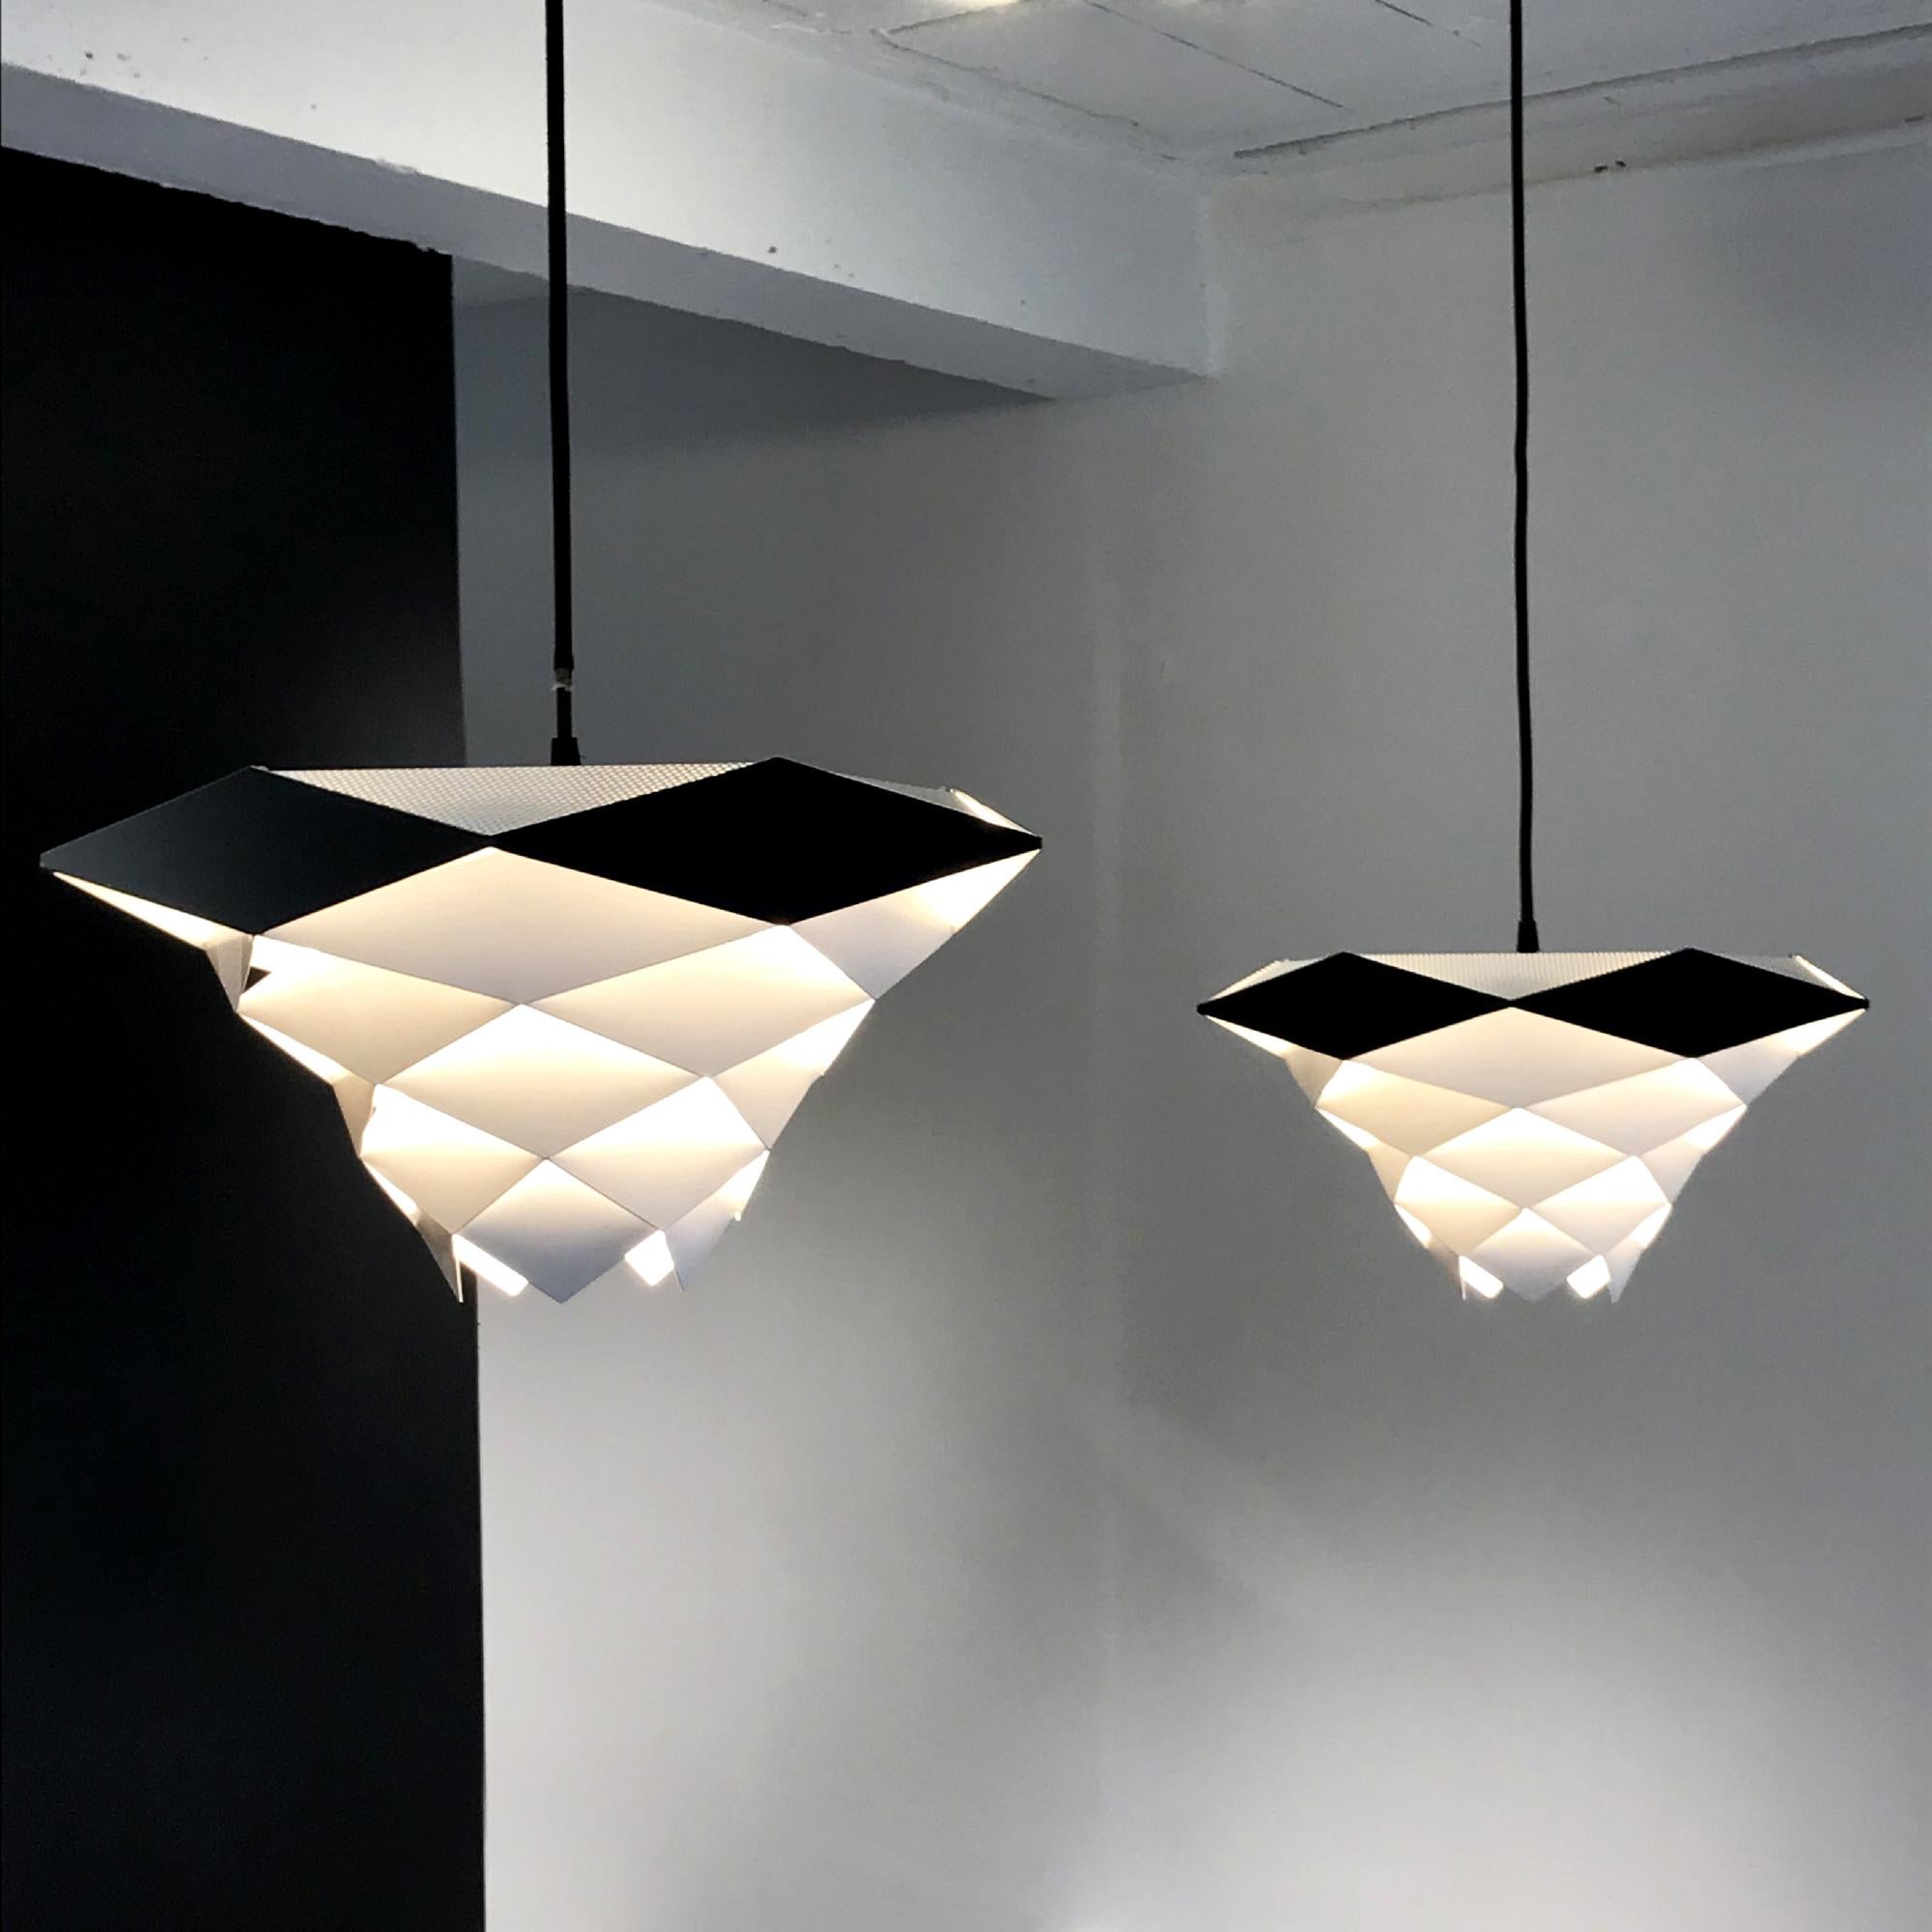 Pendant lamp model Symfoni by Preben Dal for H Følsgaard Elektro from Denmark circa 1960.
White and black painted lampshade made with metal parts diamonds shape assembled like an origami
No more in production.